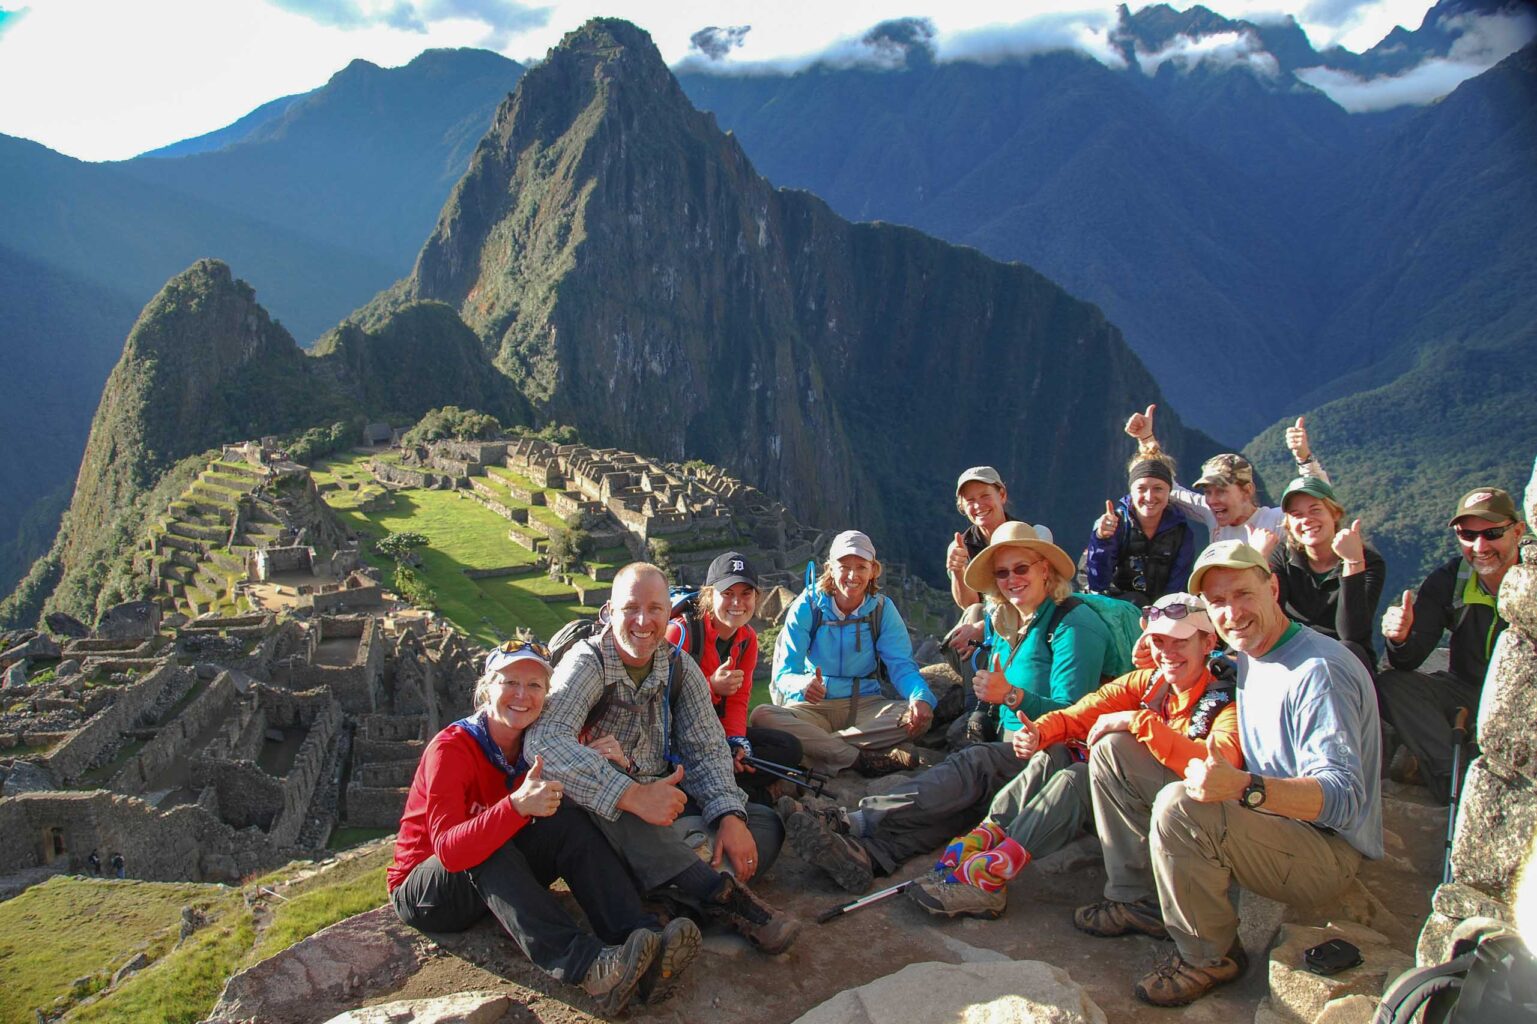 A group of hikers resting on the Inca Trail.